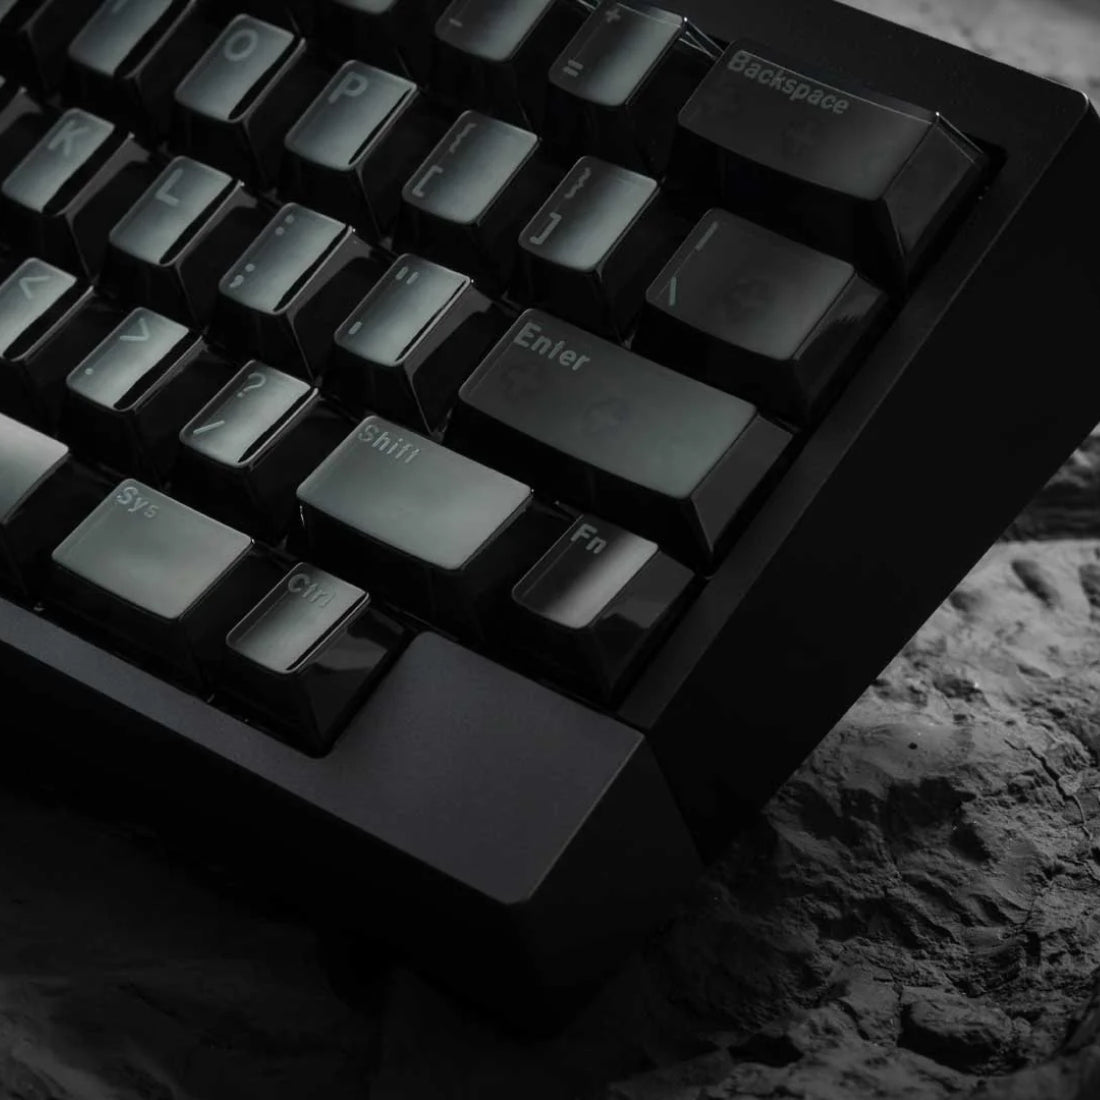 AngryMiao AM Compact Touch Wireless Keyboard - All Black - لوحة مفاتيح - Store 974 | ستور ٩٧٤